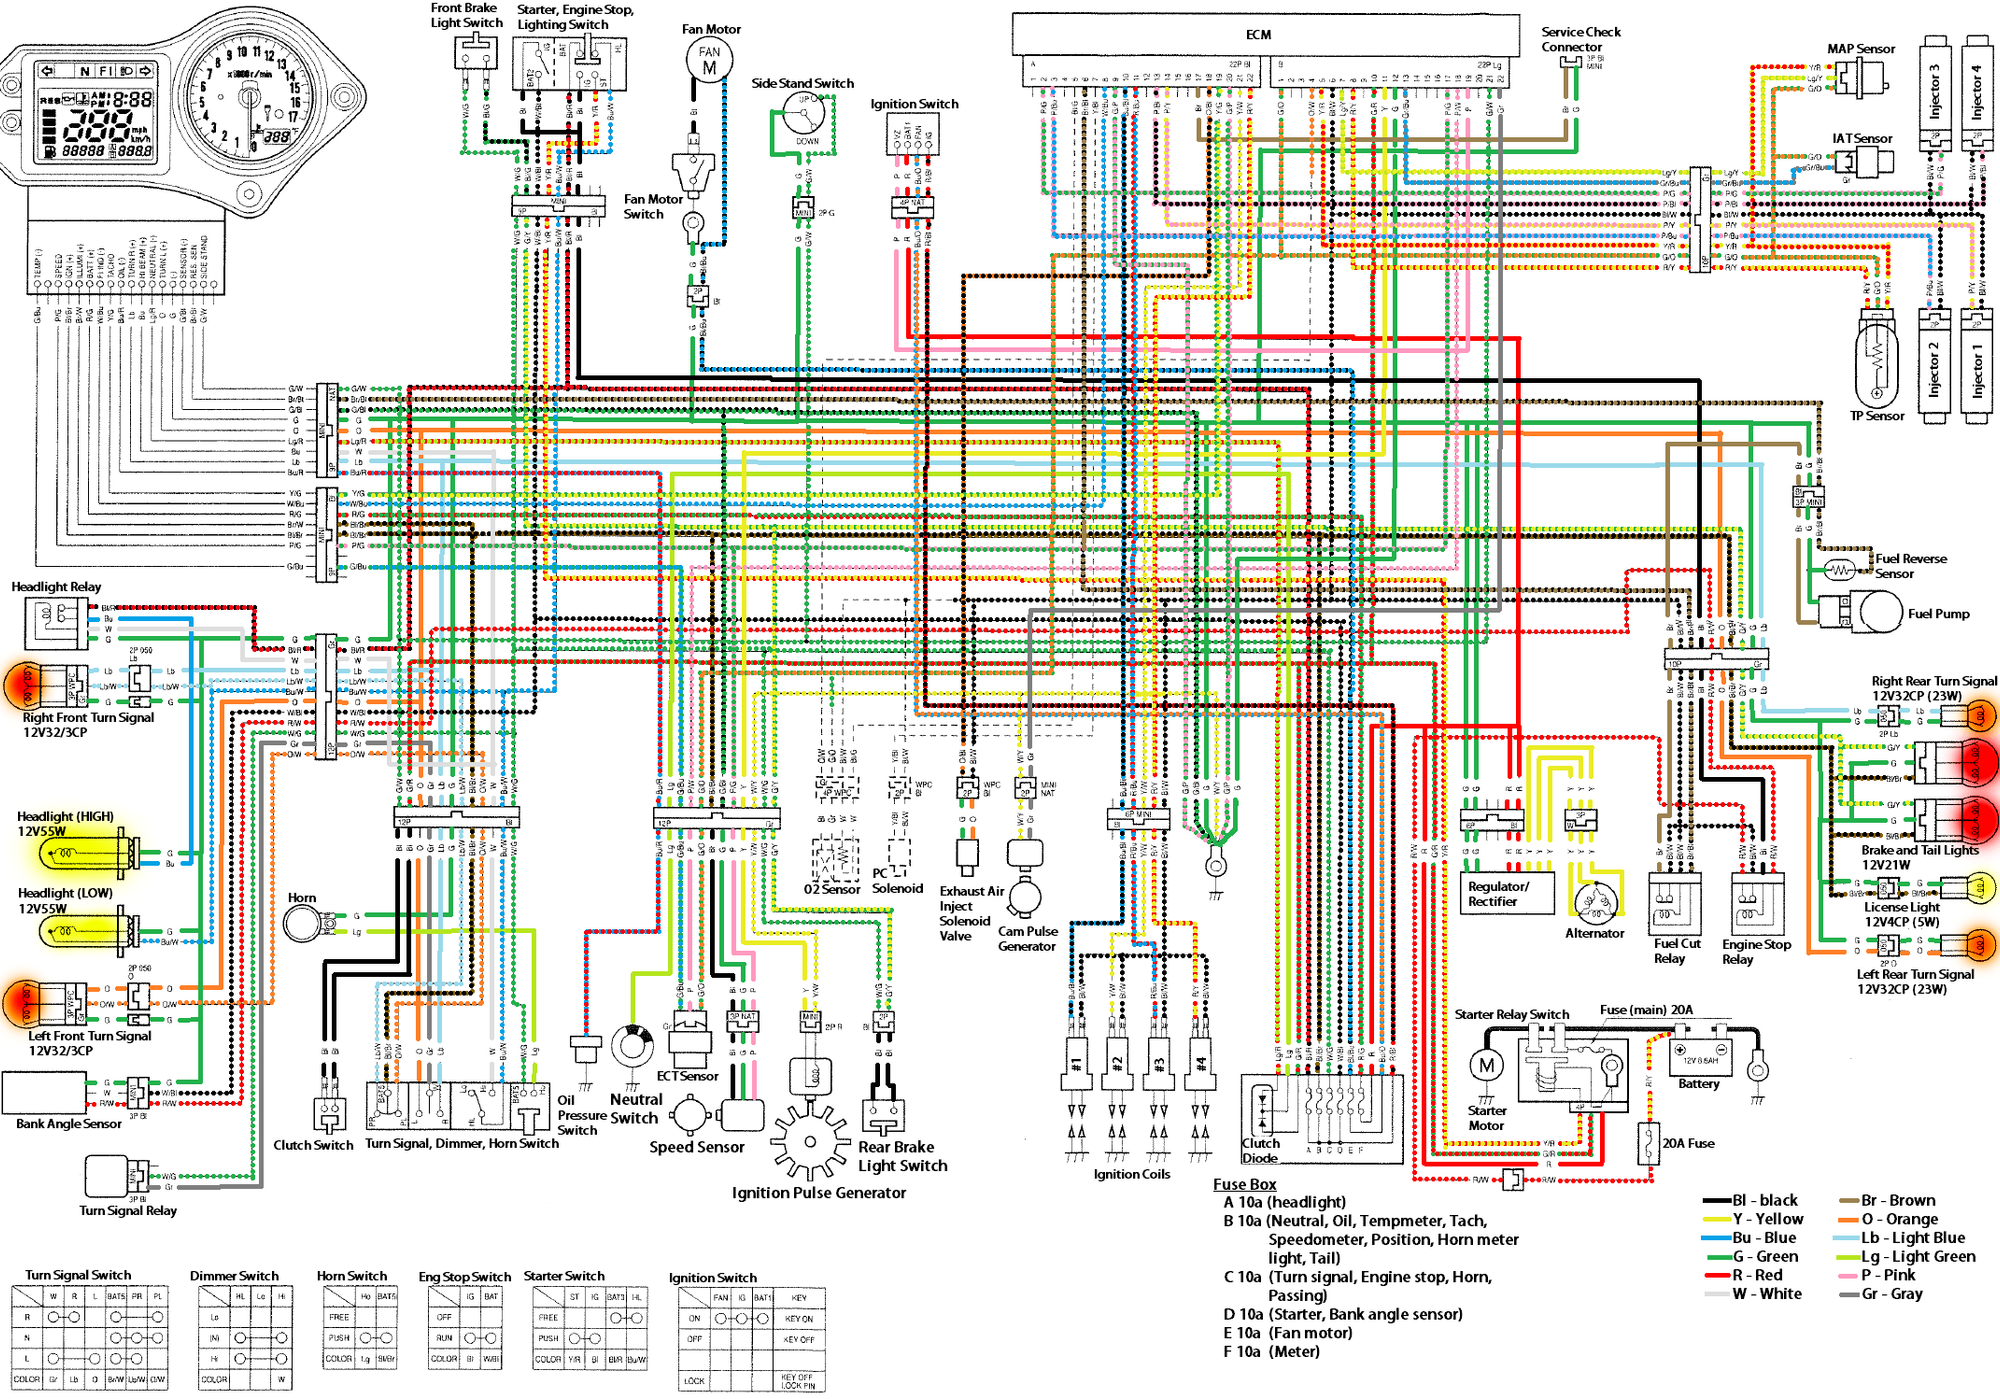 Wiring Diagram Is Wrong Or My